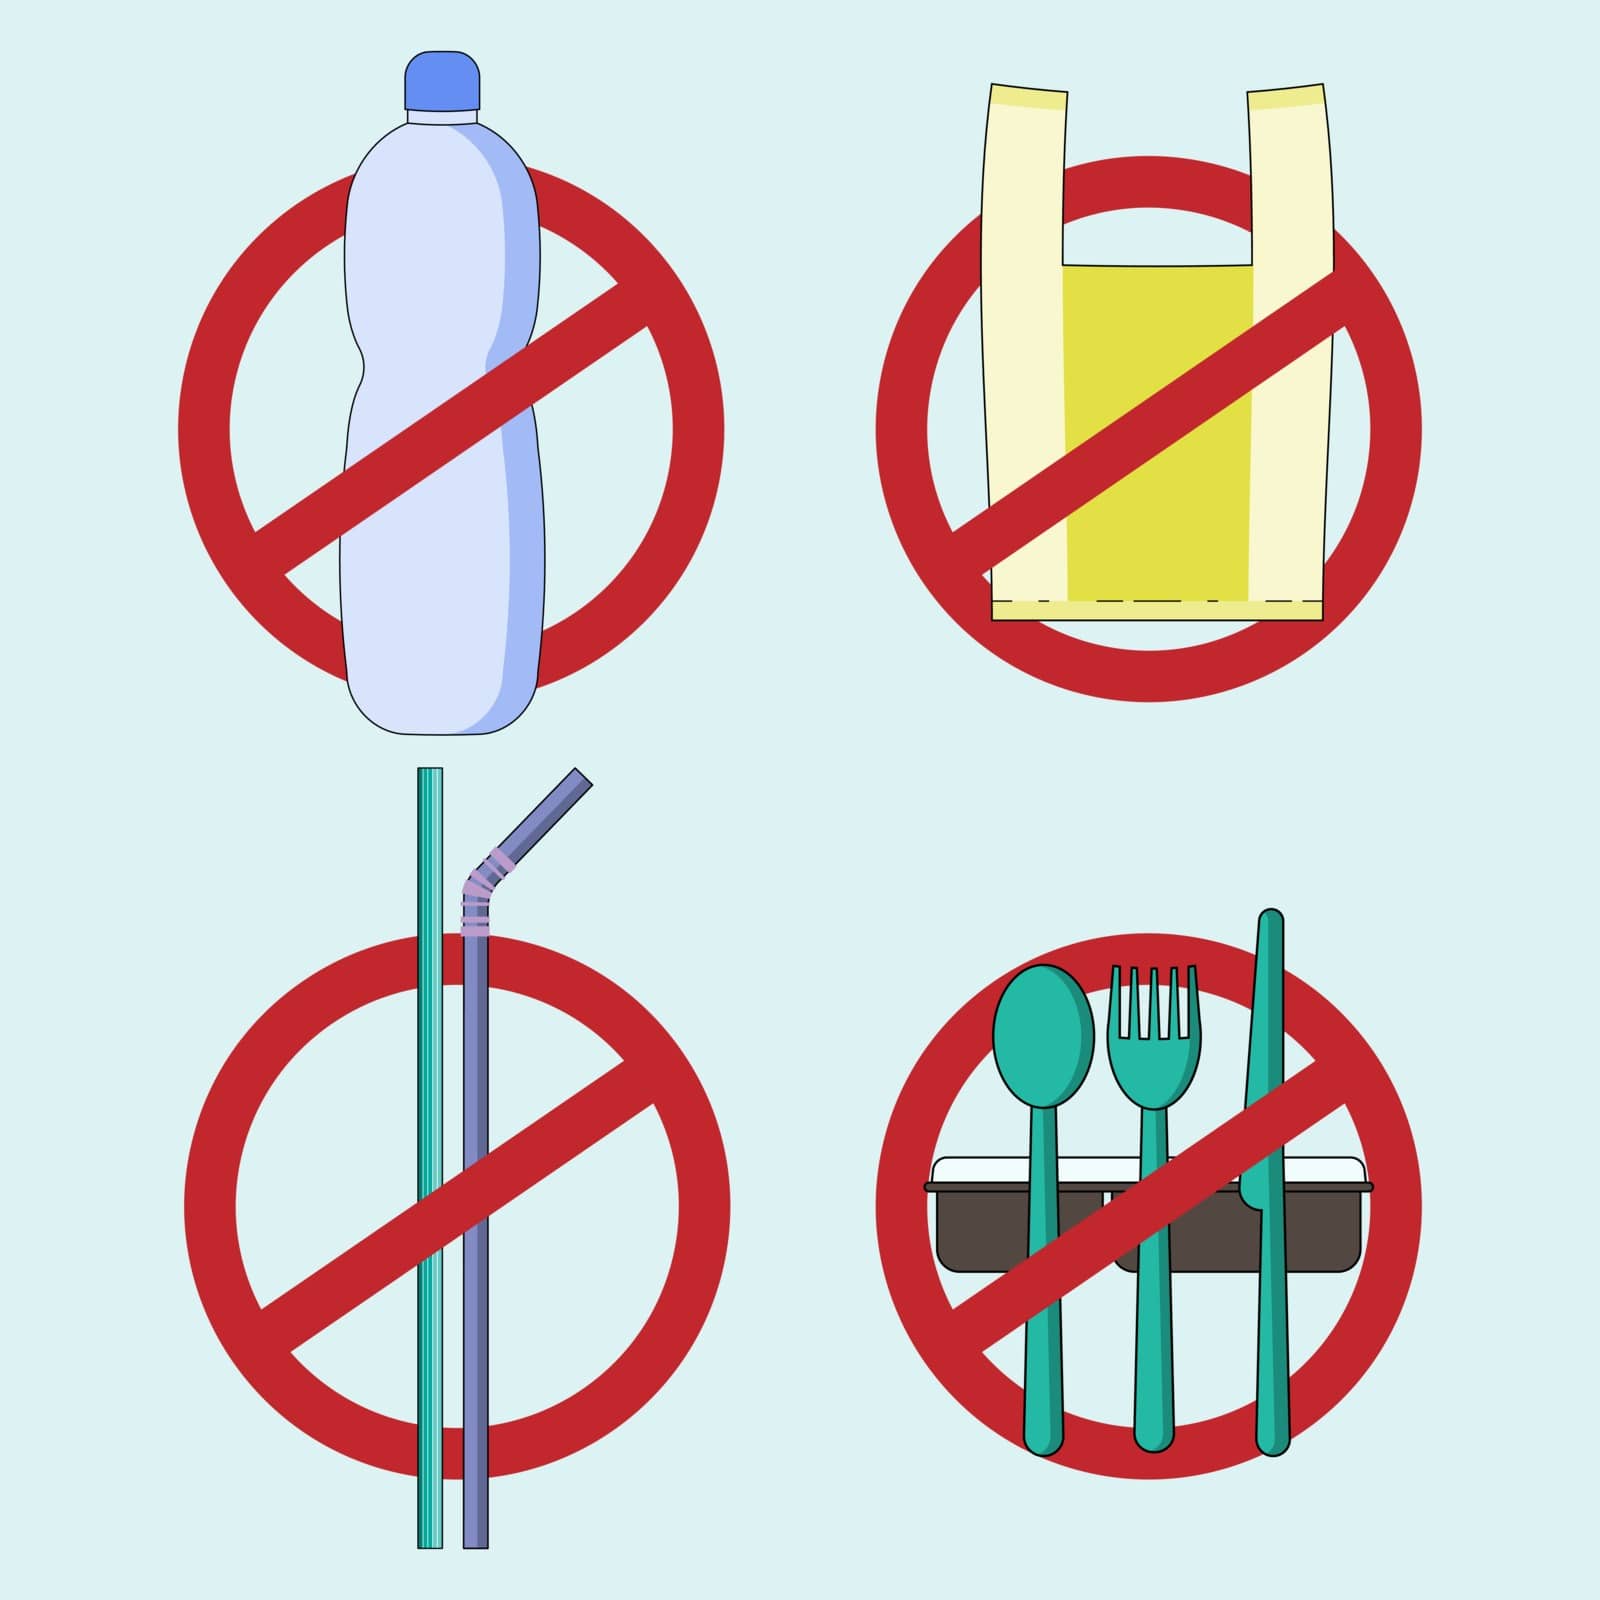 Stop using single-use plastic concept. Refuse and reduce plastic waste metaphor. No symbols of disposable plastic product. Vector illustration outline flat design style.